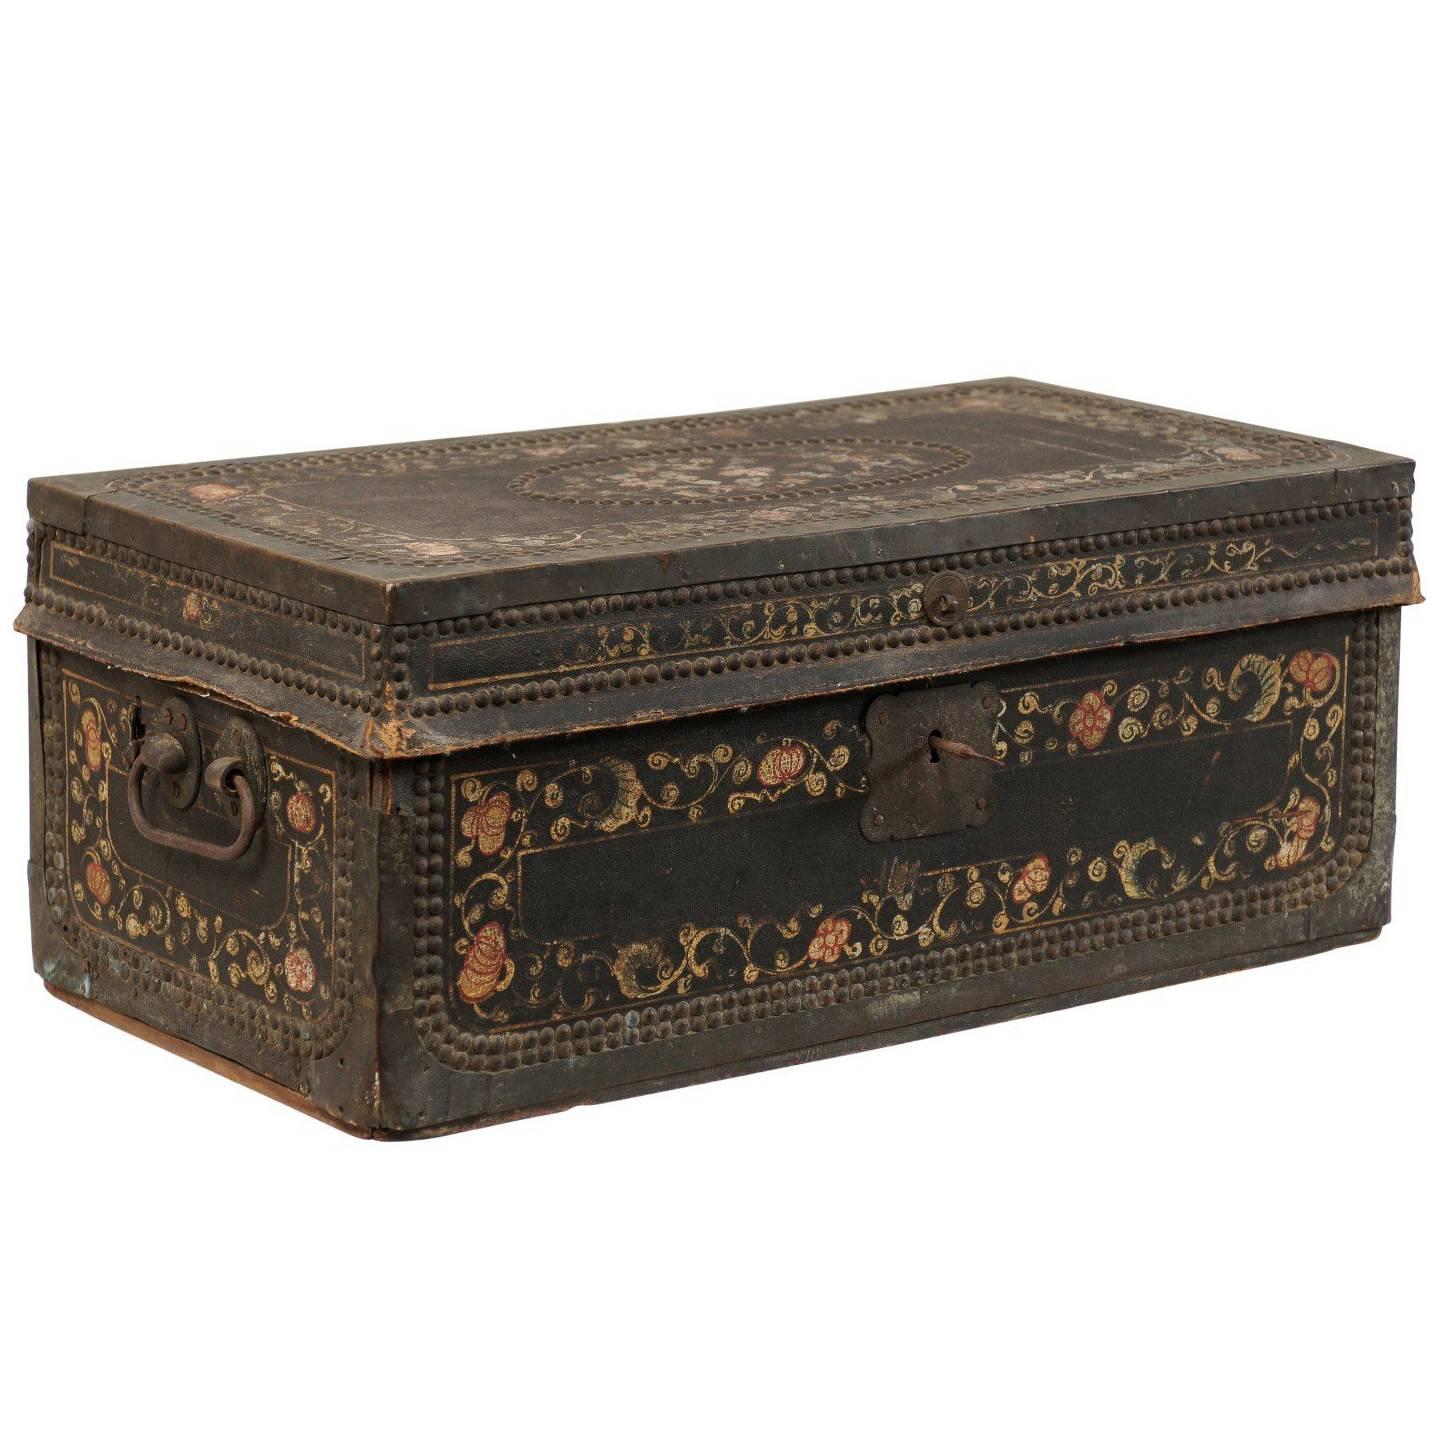 19th Century Chinese Camphor Wood and Leather Trunk with Hand-Painted Flowers